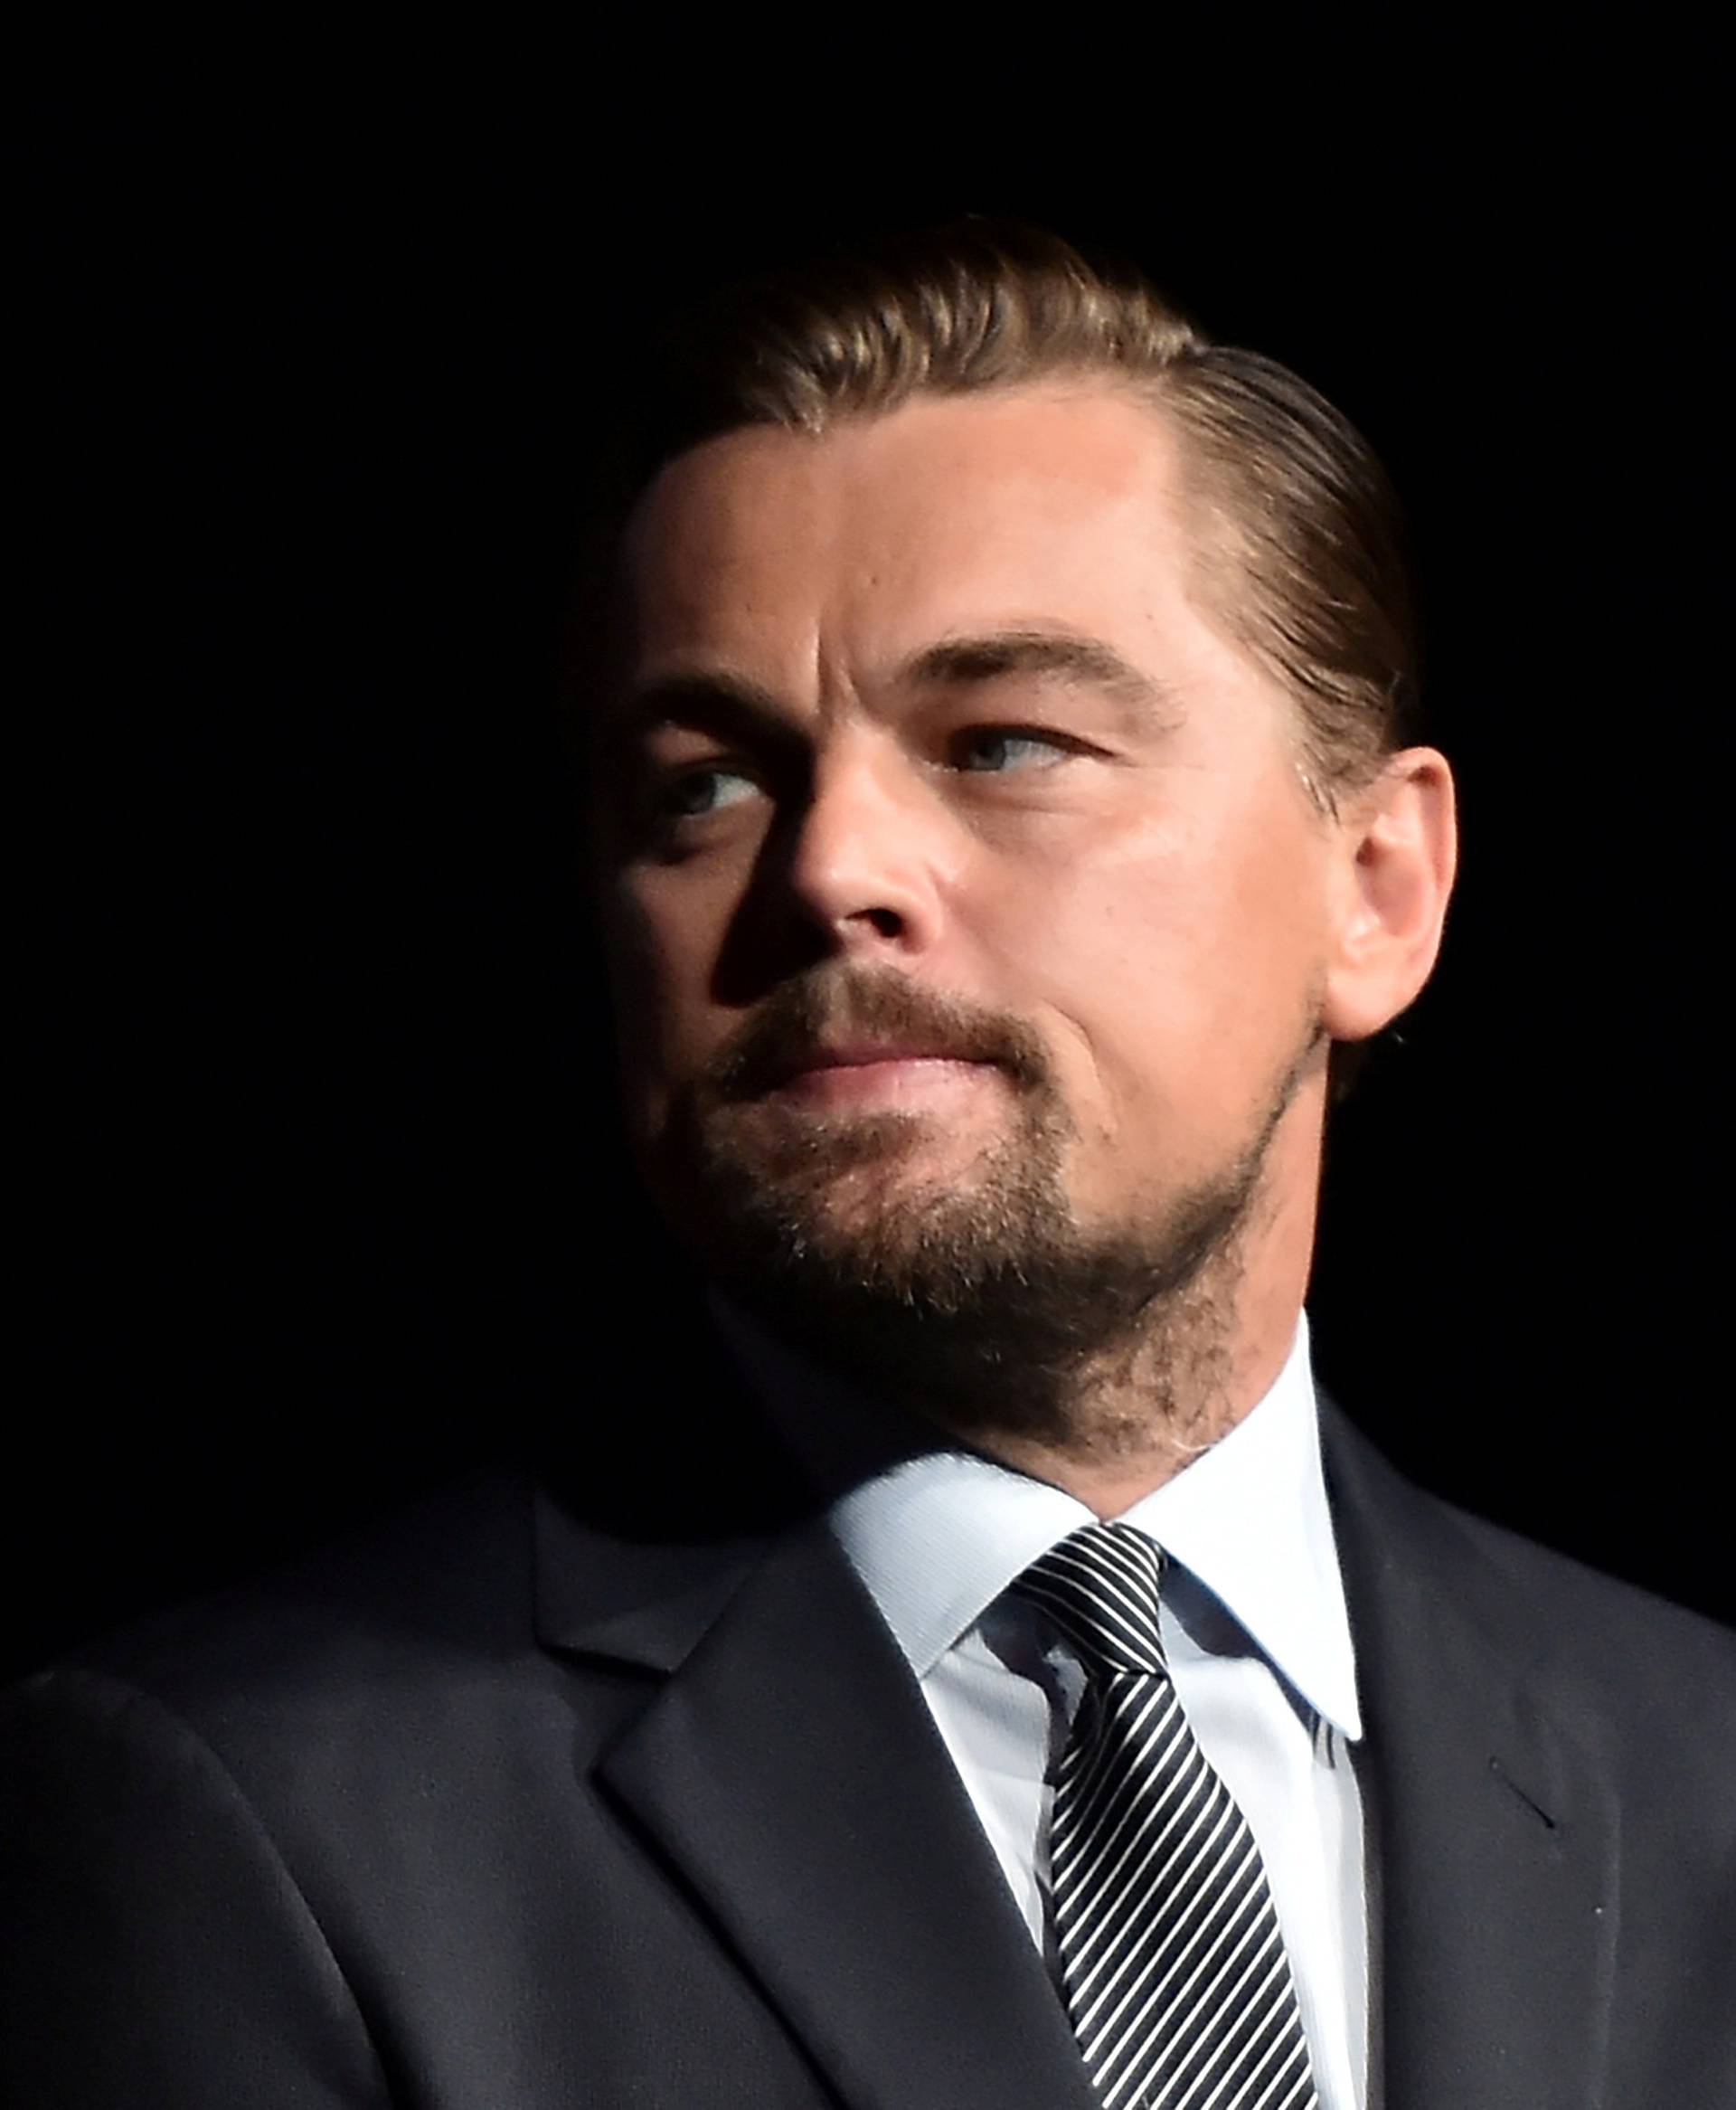 FILE PHOTO: US actor Leonardo DiCaprio looks on prior to speaking on stage during the Paris premiere of the documentary film "Before the Flood" in Paris